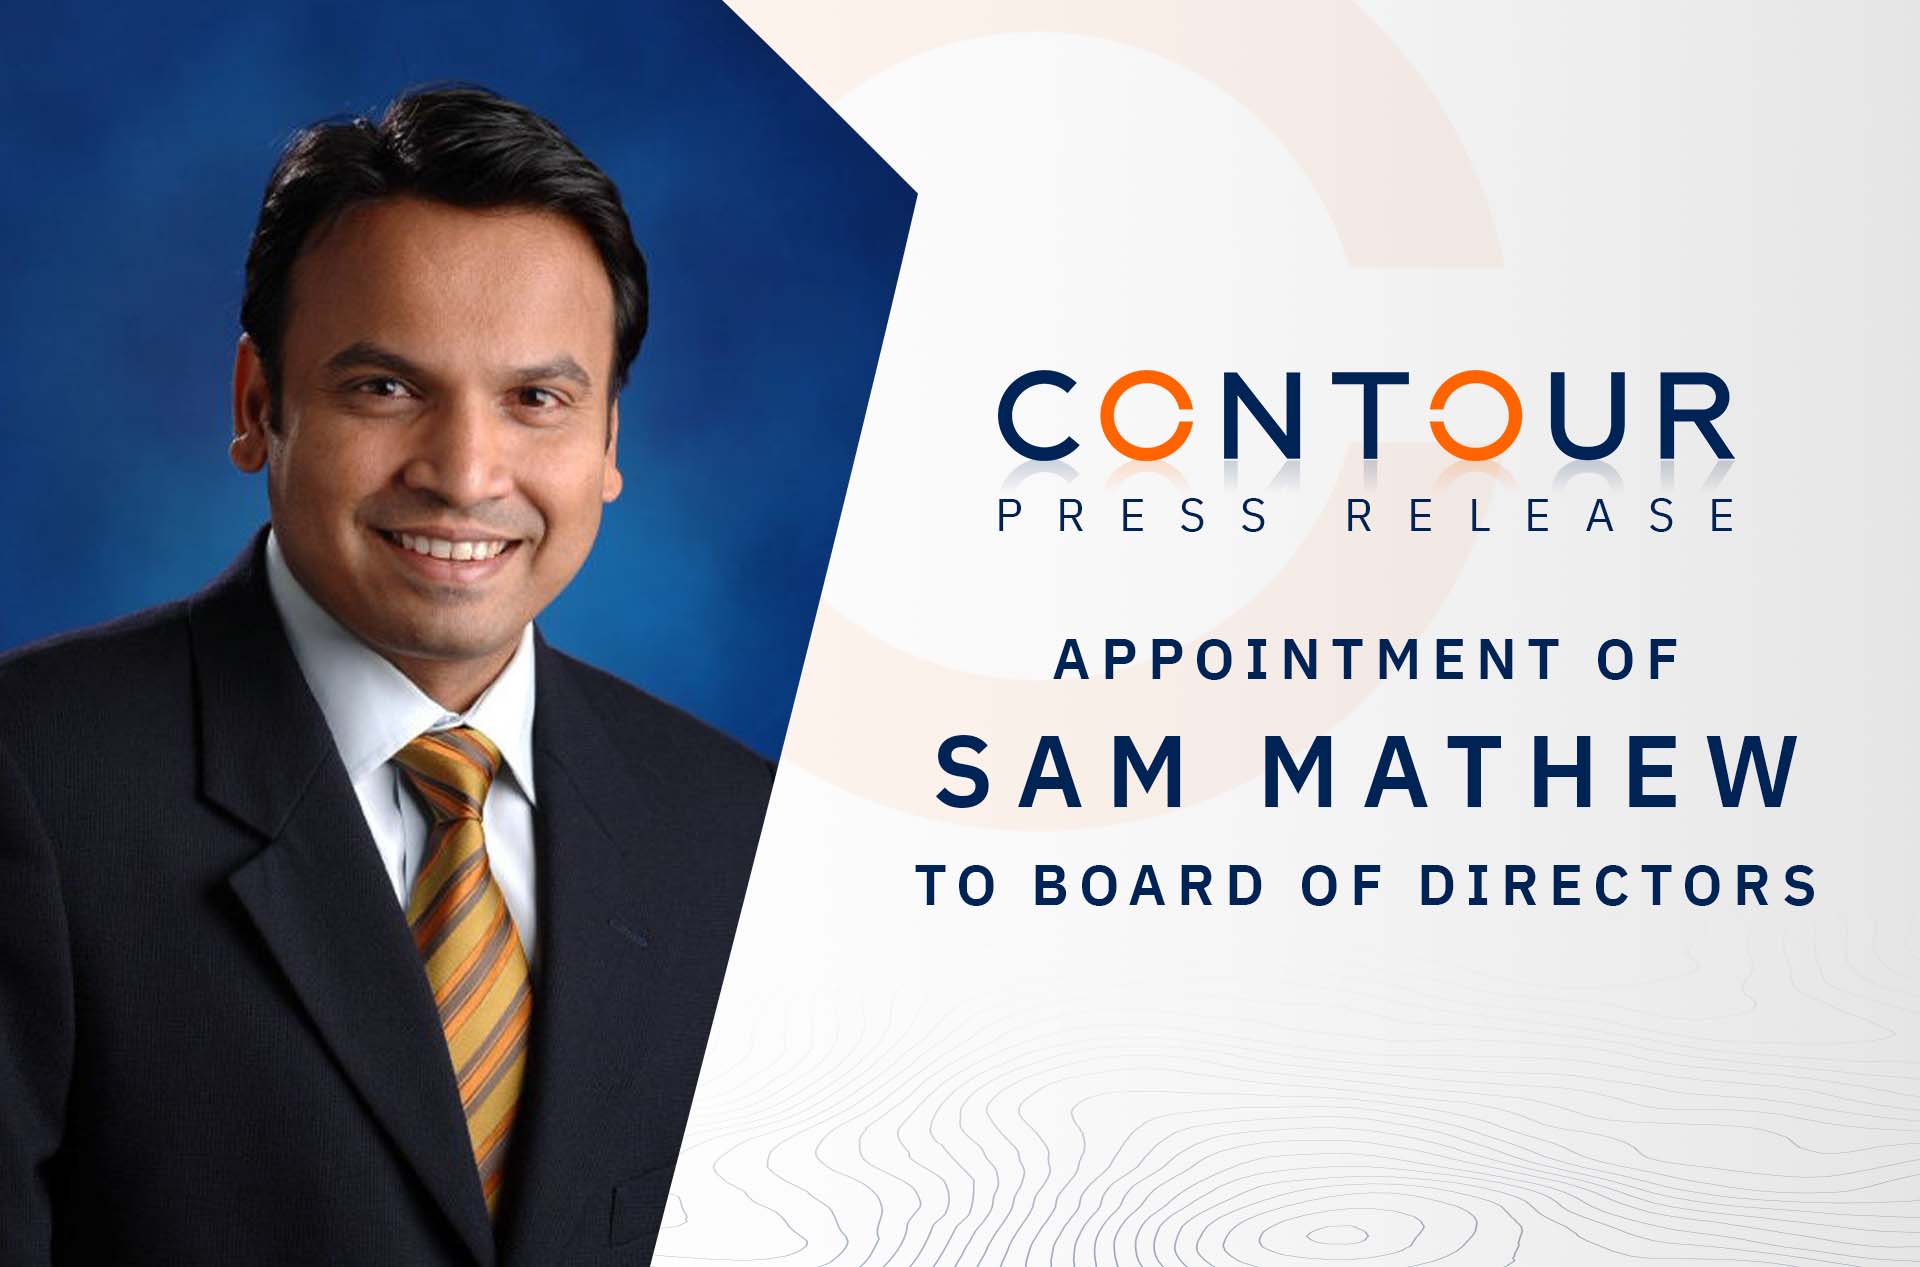 Digital trade finance network Contour announces appointment of Samuel Mathew to its Board of Directors